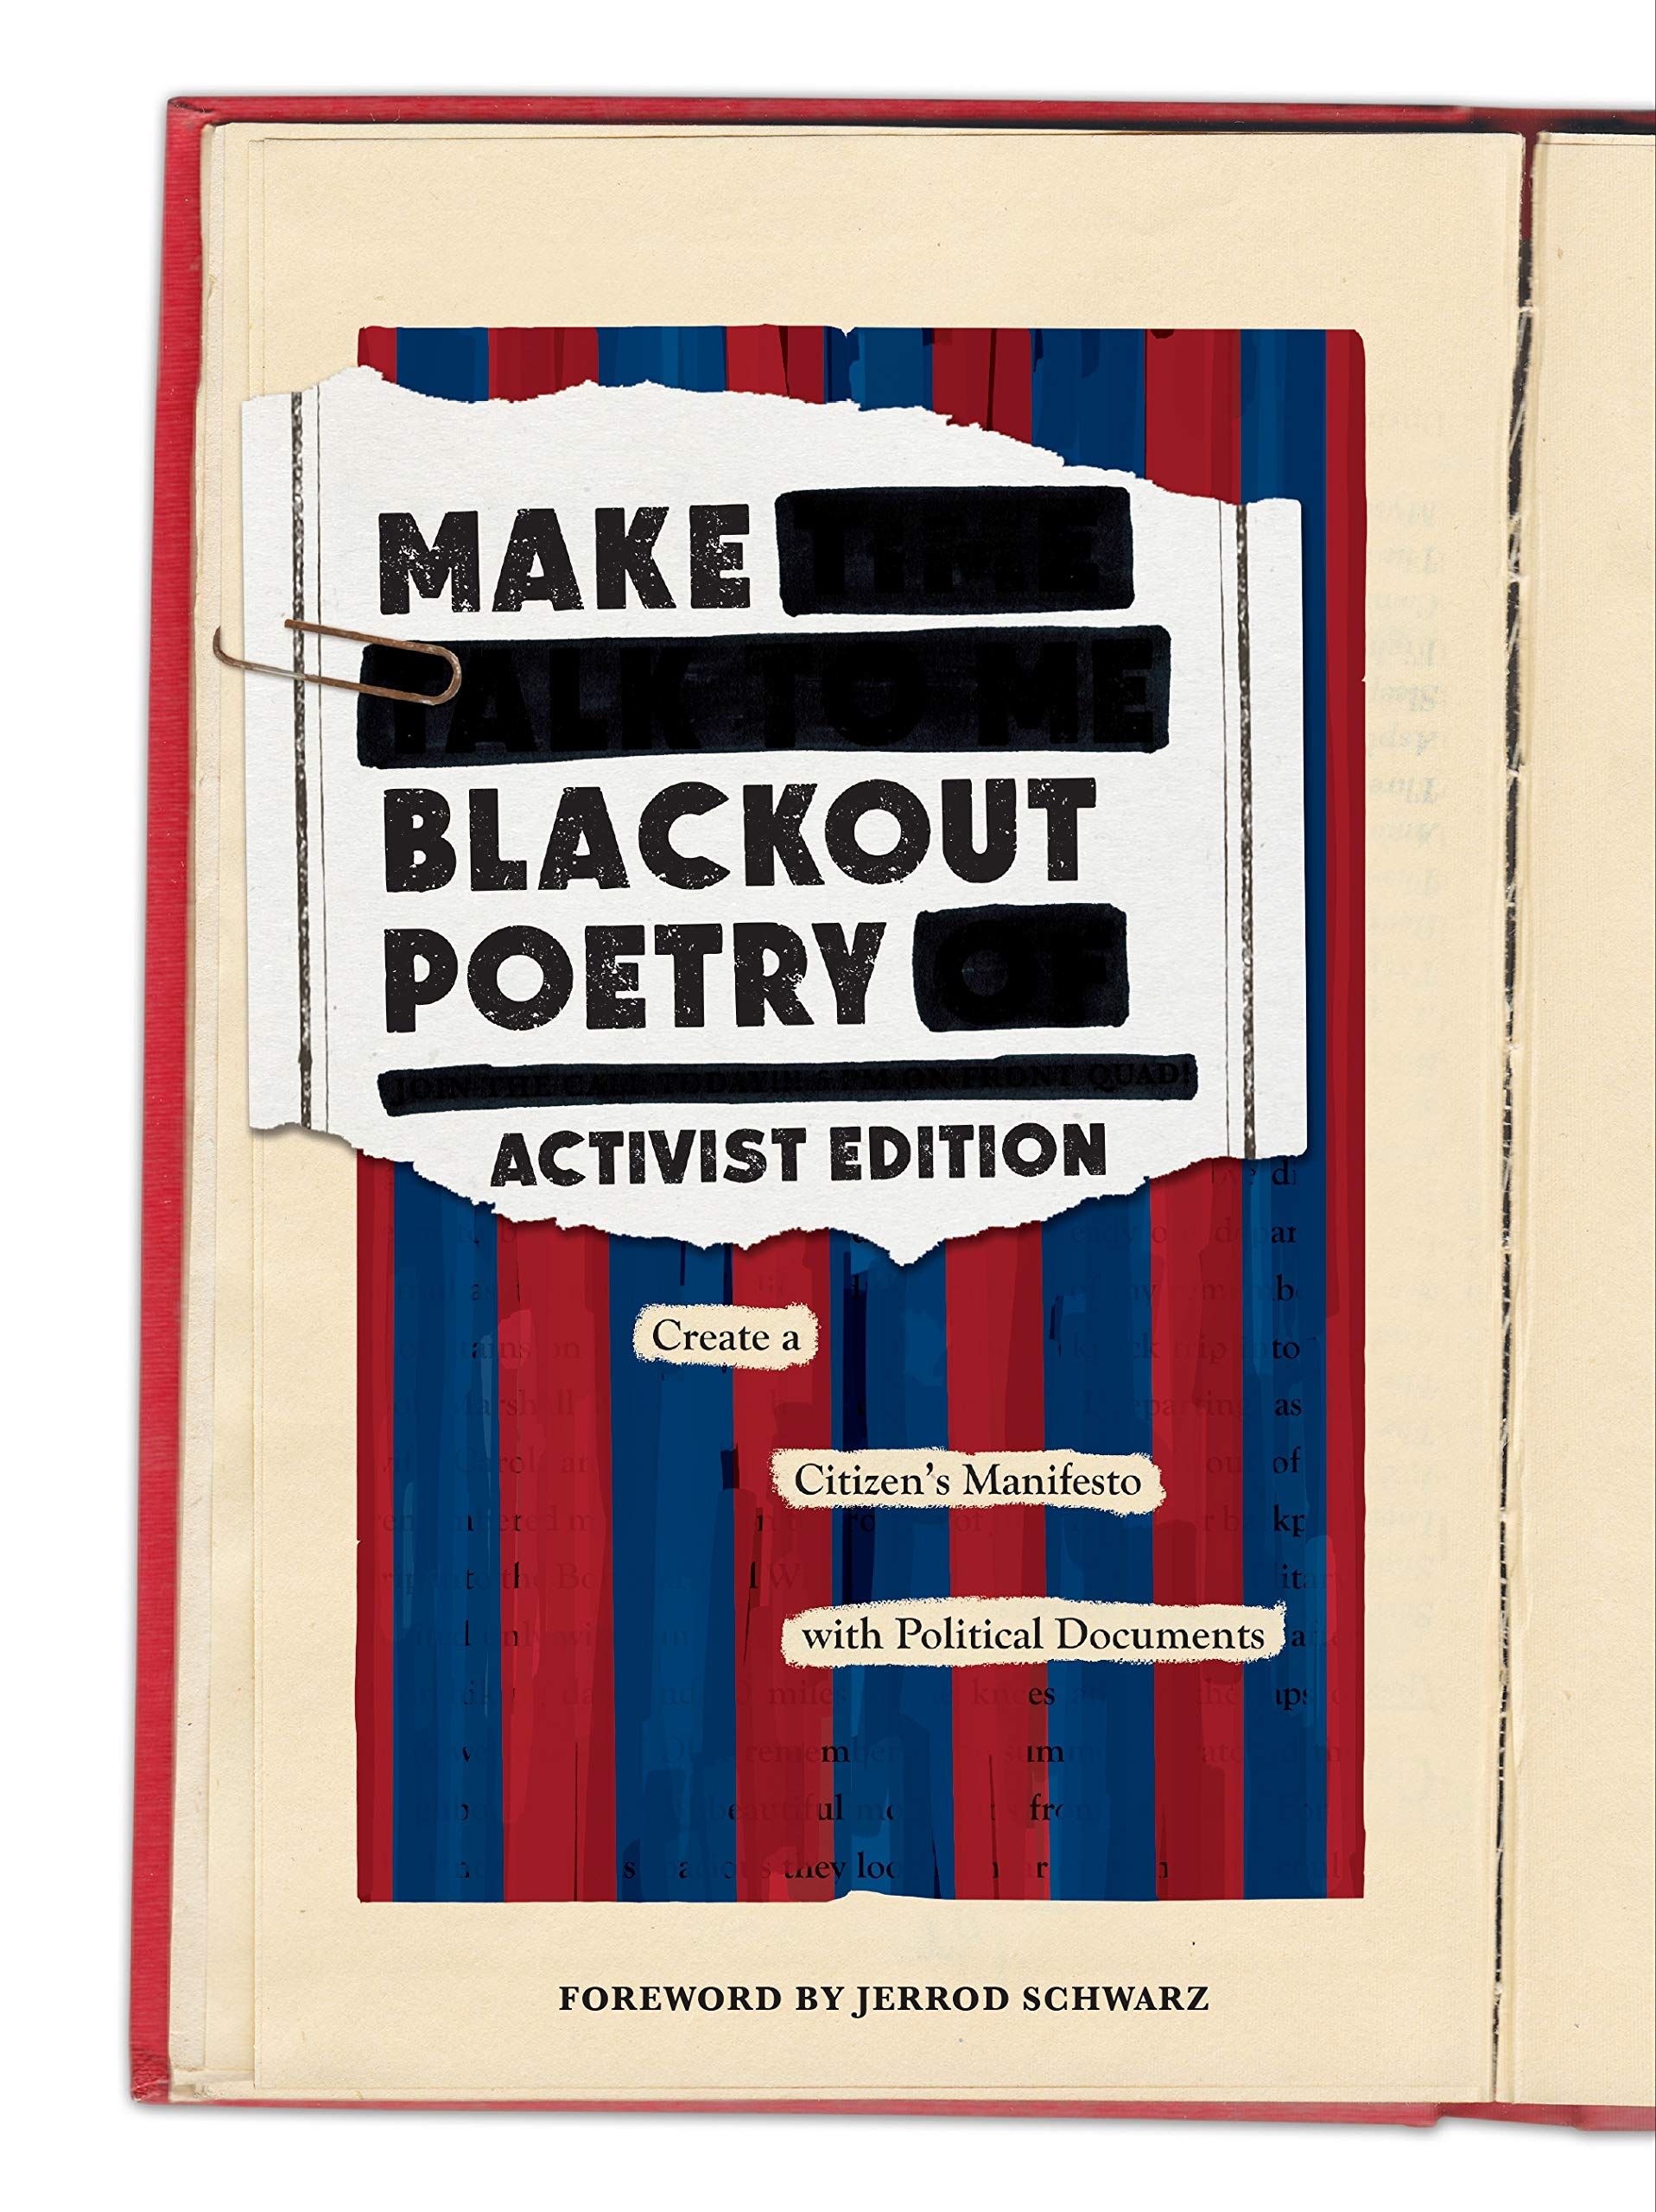 Make Blackout Poetry: Activist Edition